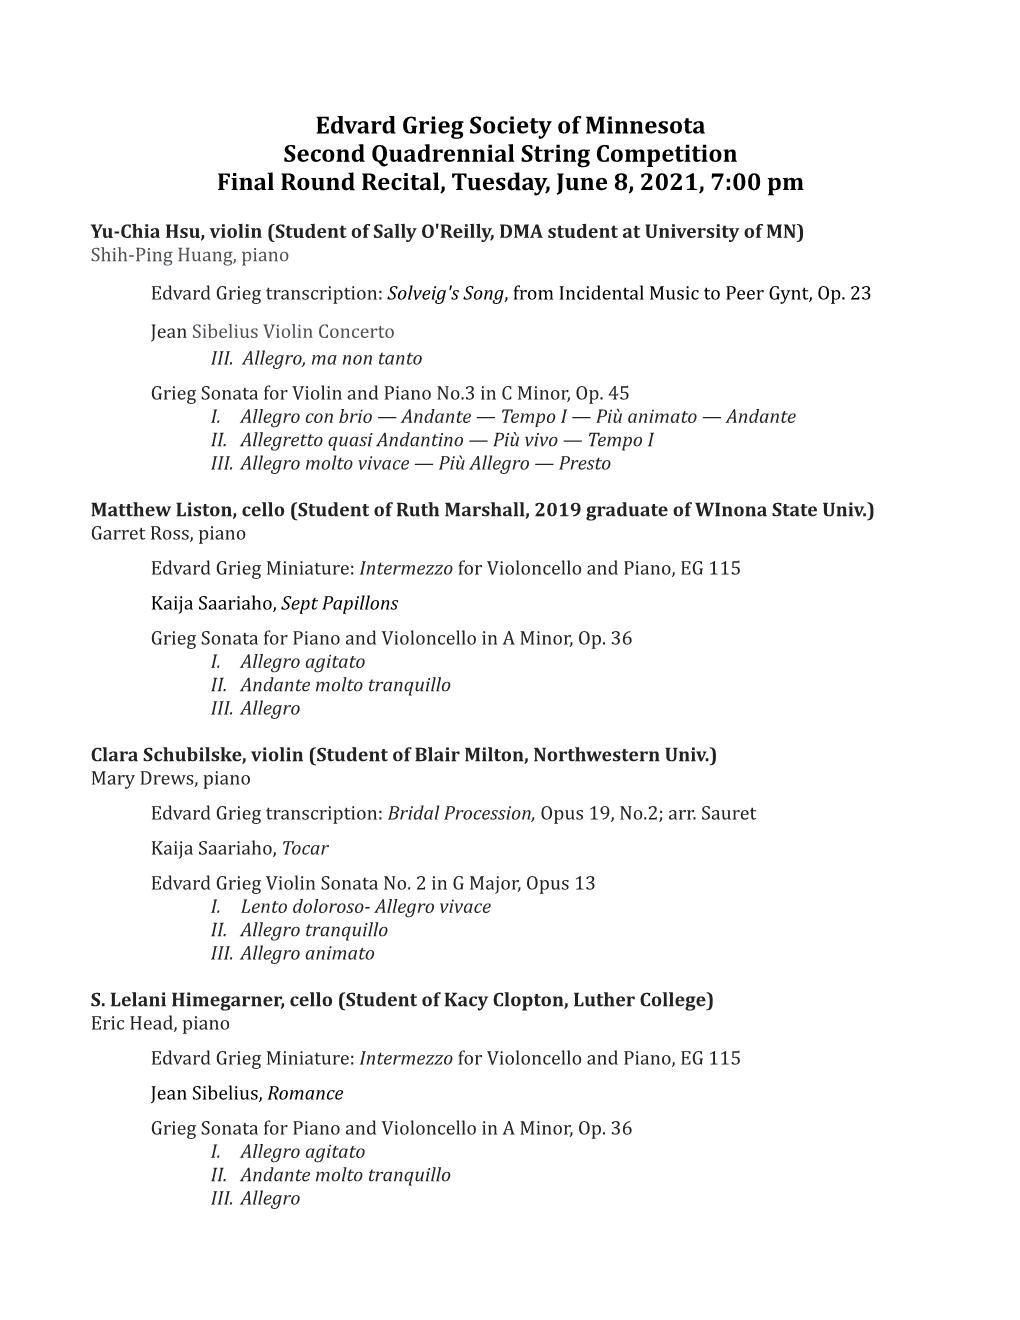 EGS String Competition Finals Program